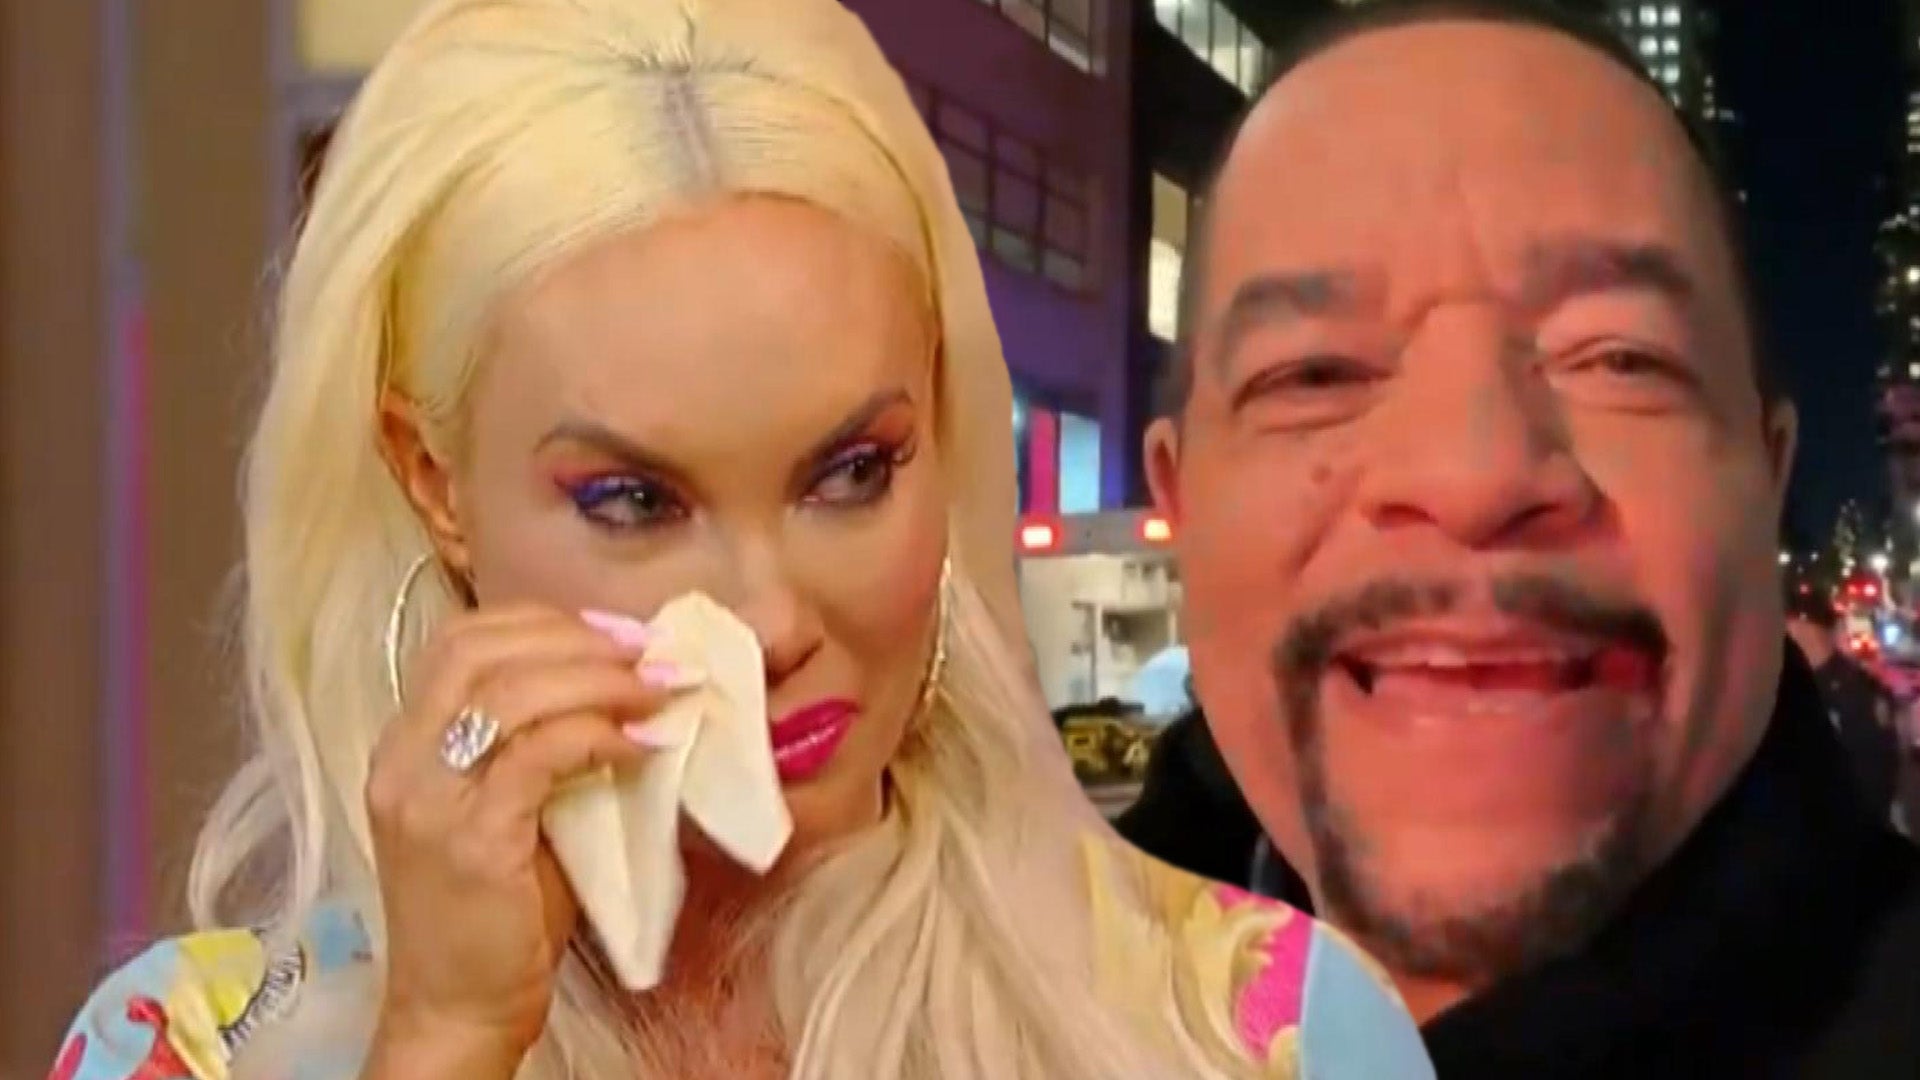 Ice-T Responds to 'Weirdo' Hate Comments on Wife Coco Austin's